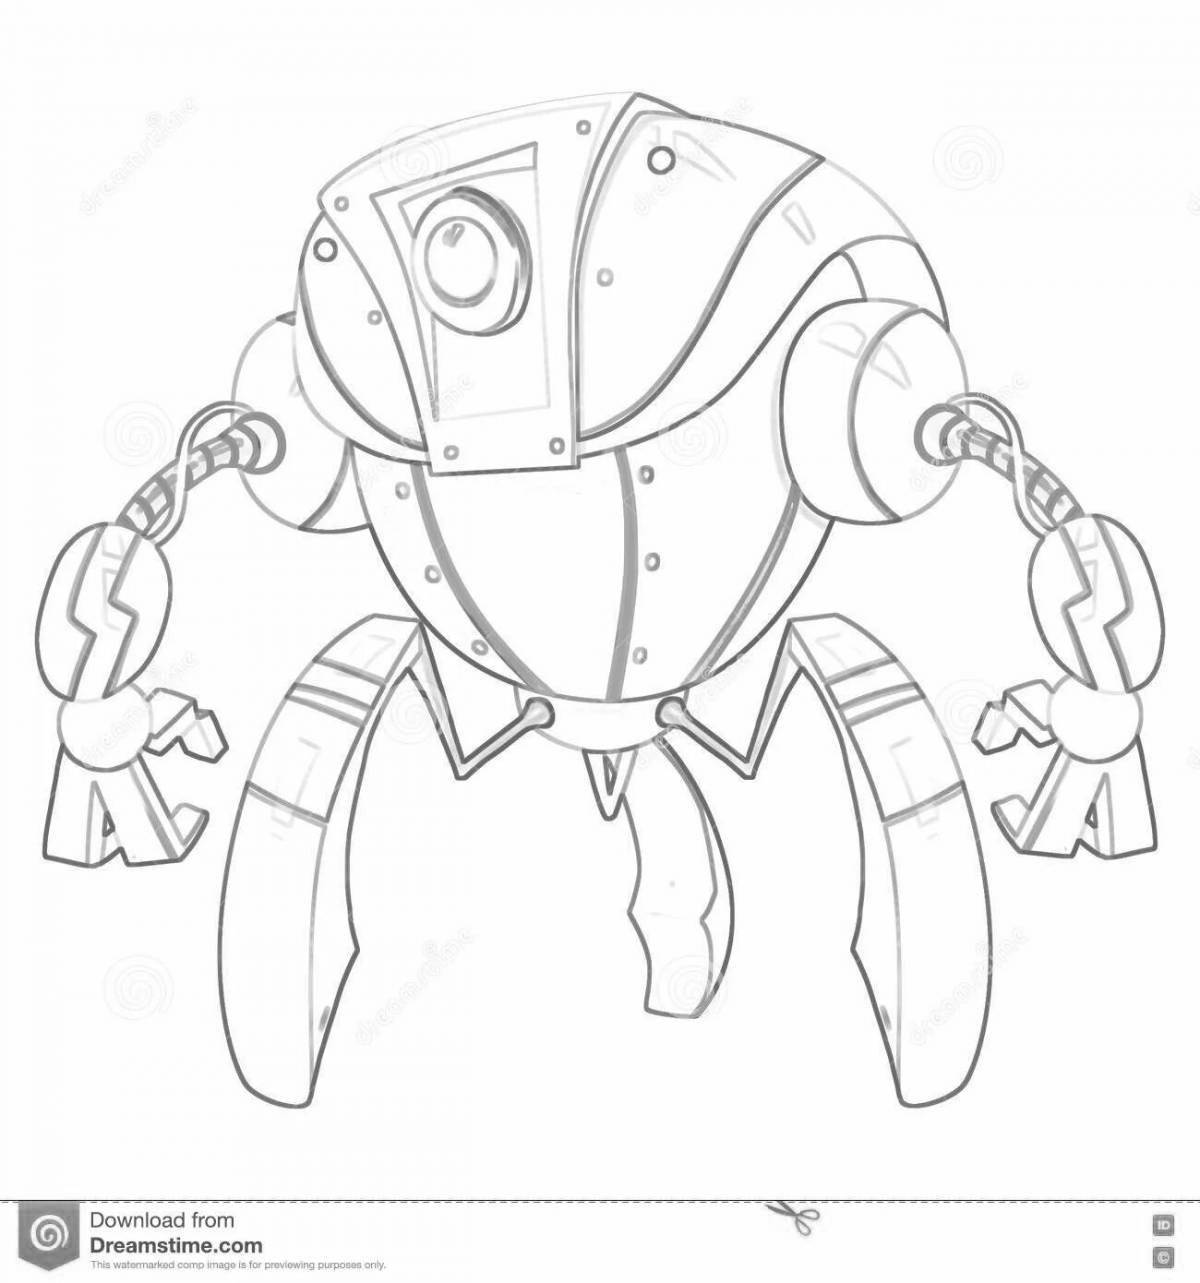 Amazing siren head robot coloring page